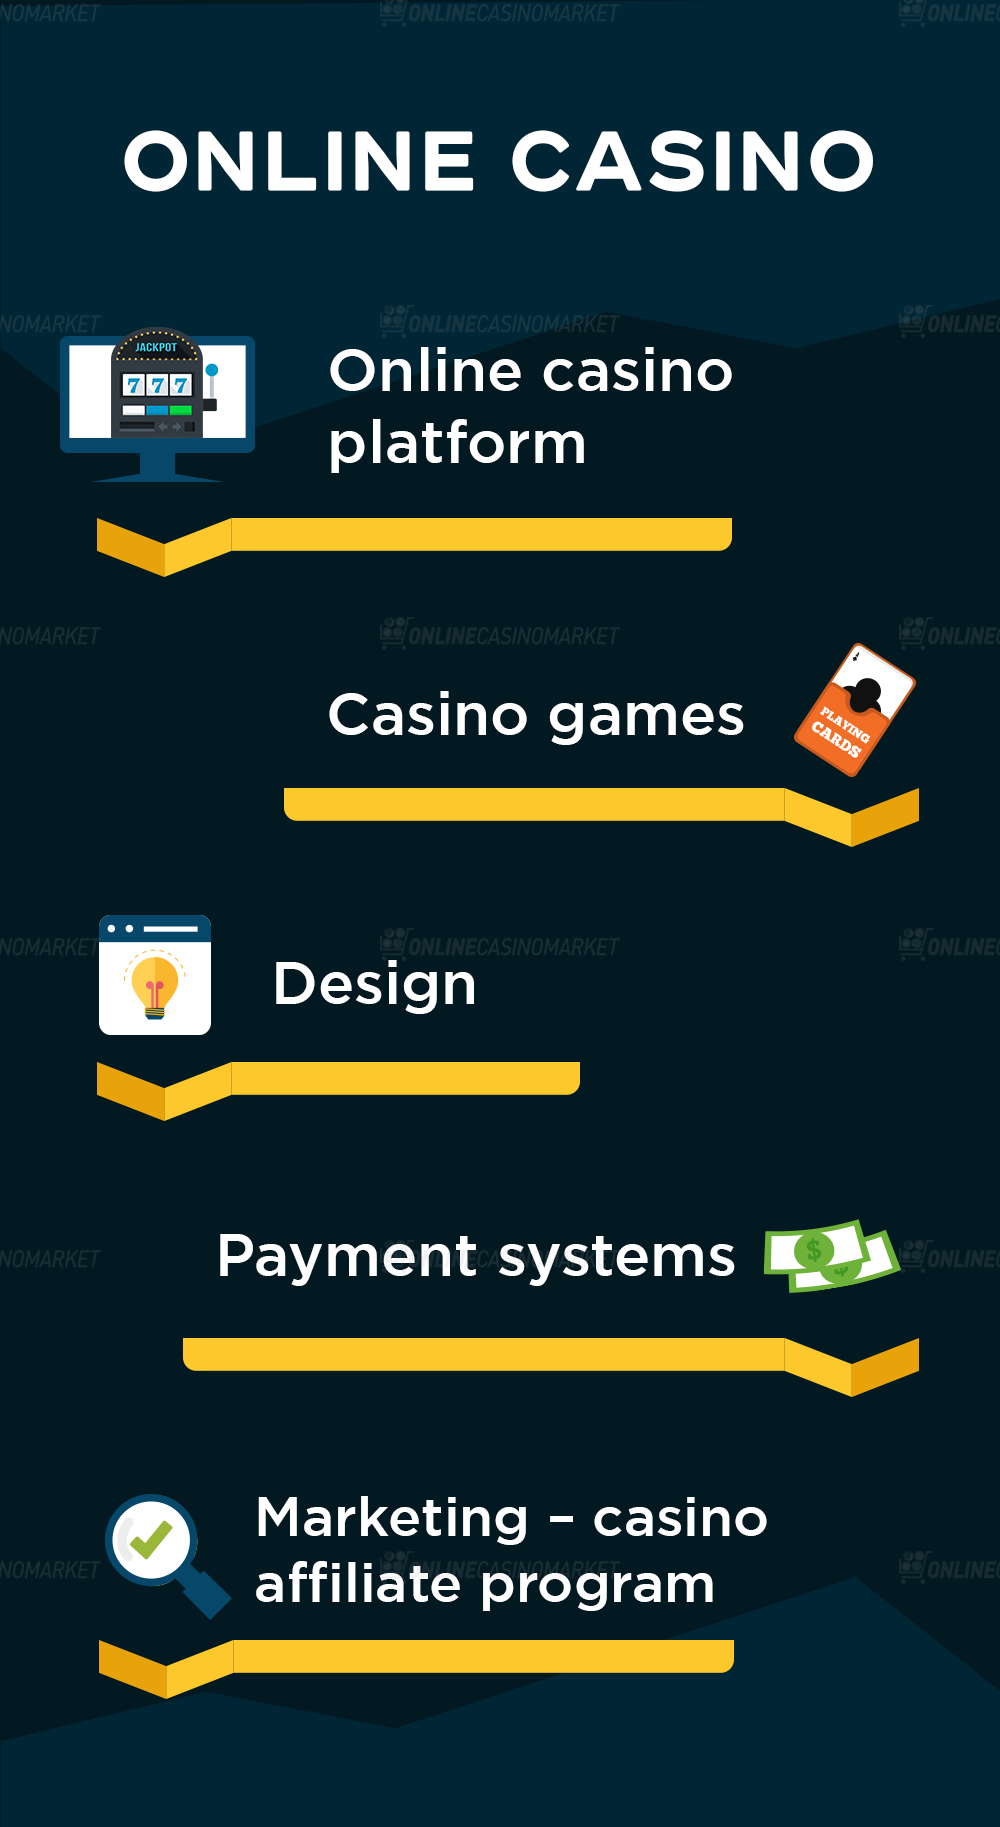 Online casino structure: infographic